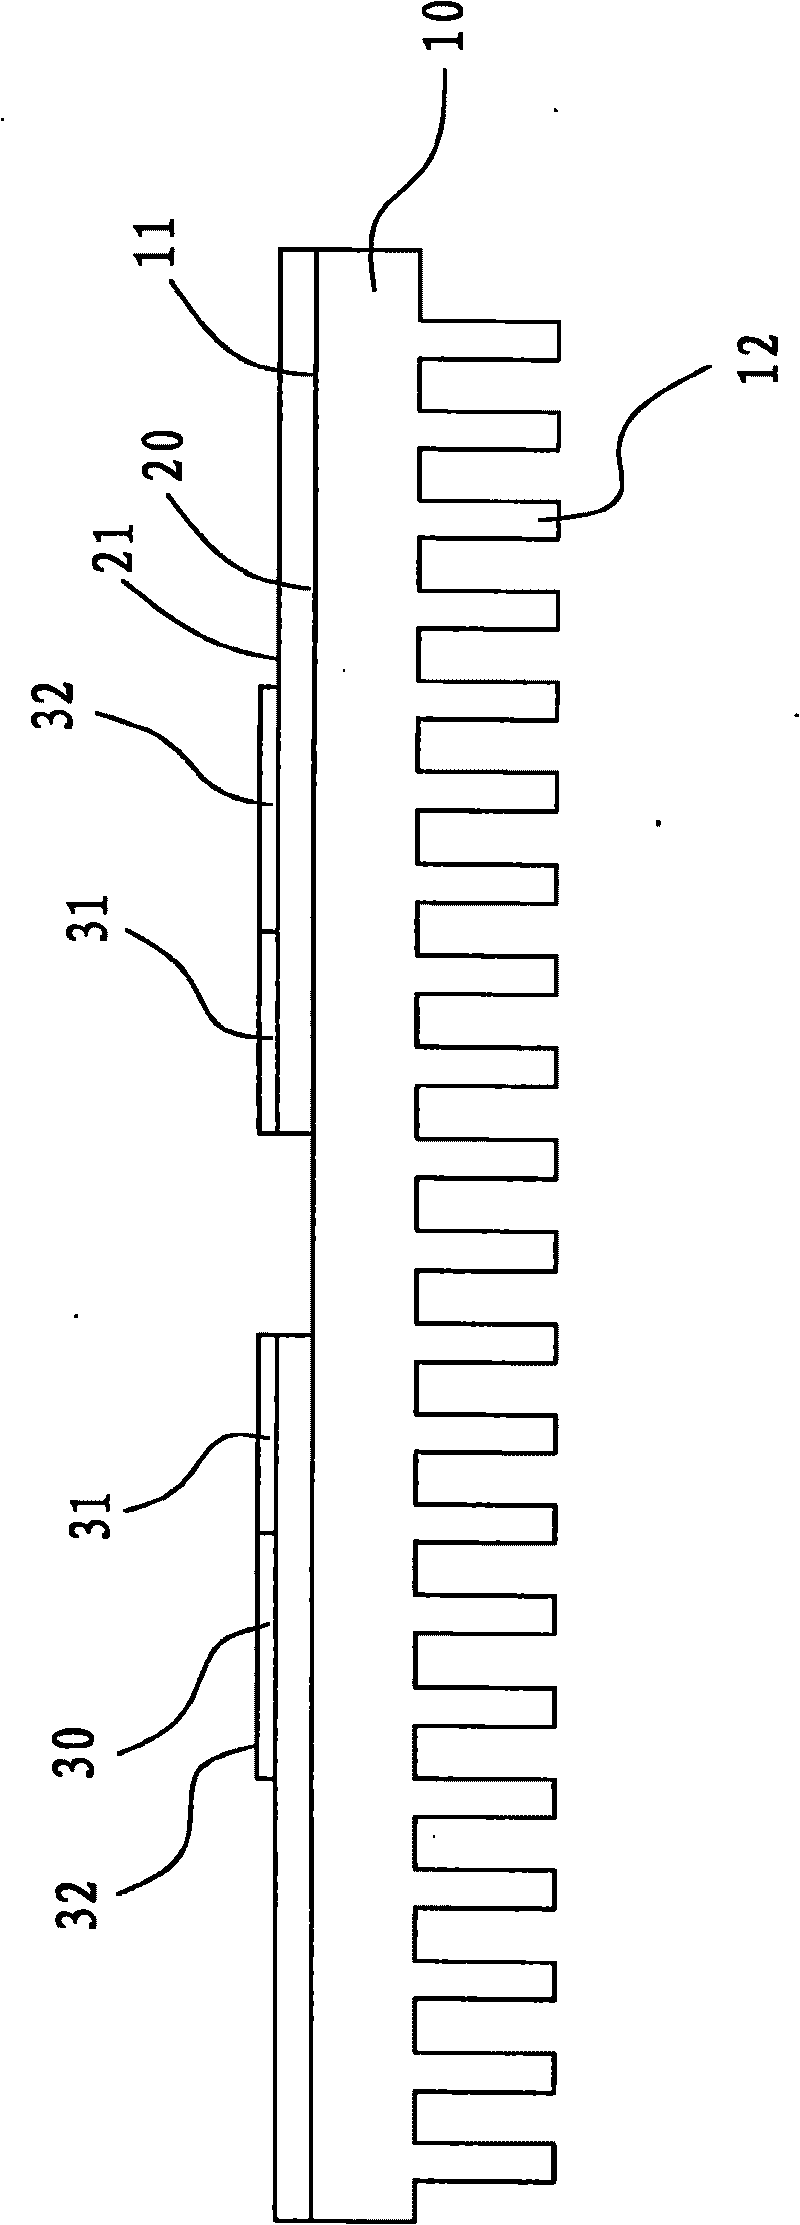 Composite heat sink of electrical circuit